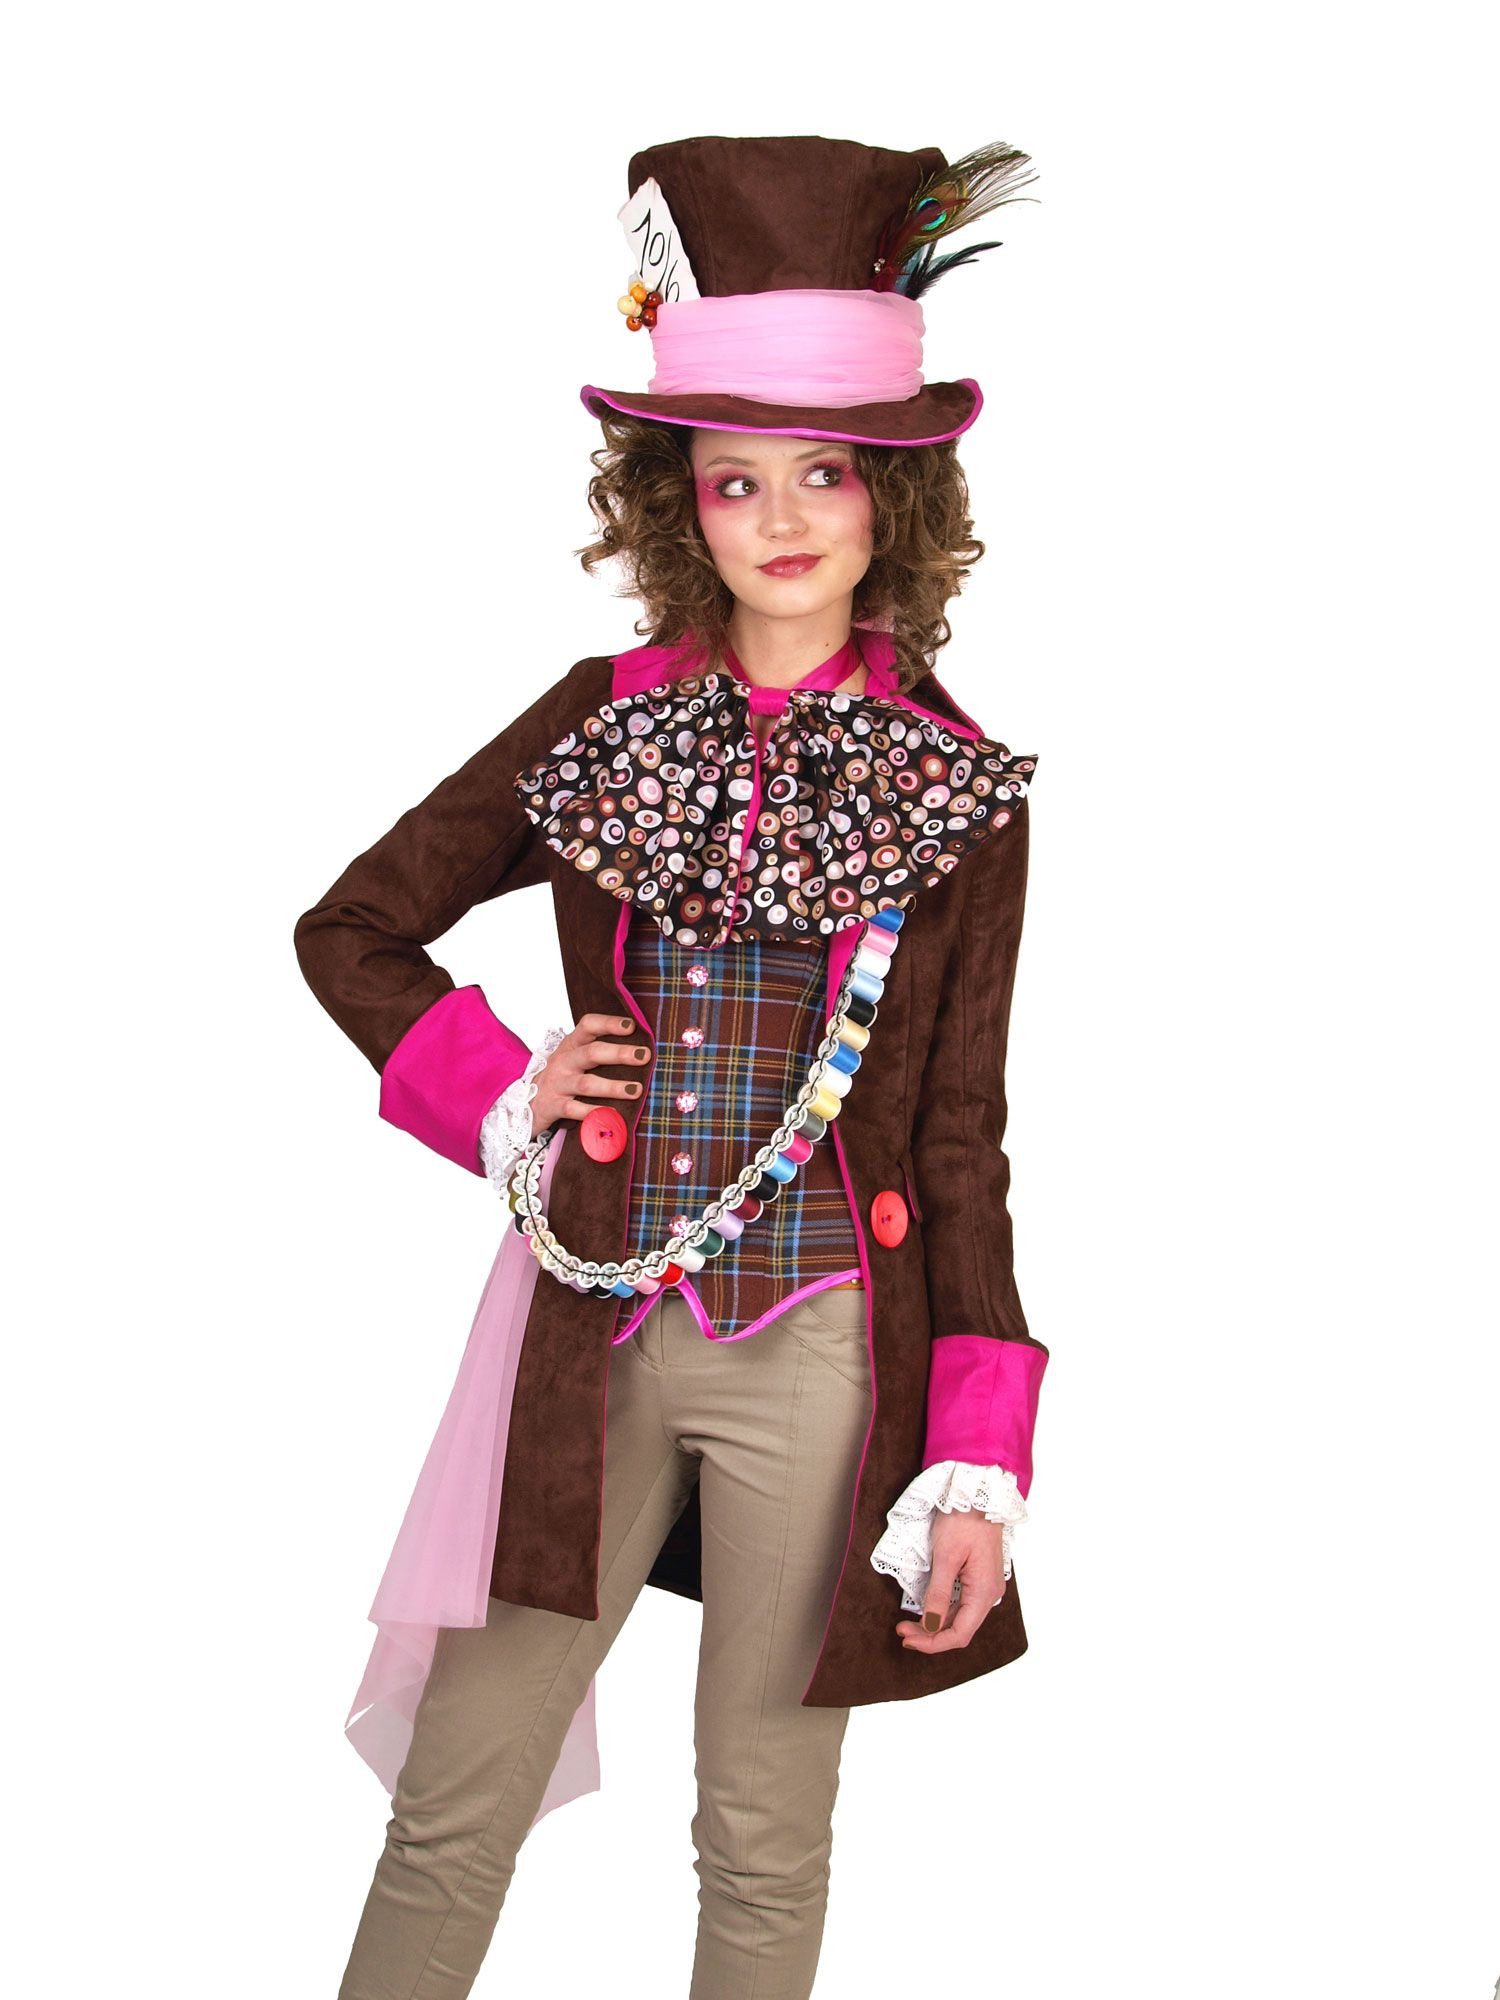 Mad Hatters Tea Party Costume Ideas
 NCR Mad hatter tea party clothing